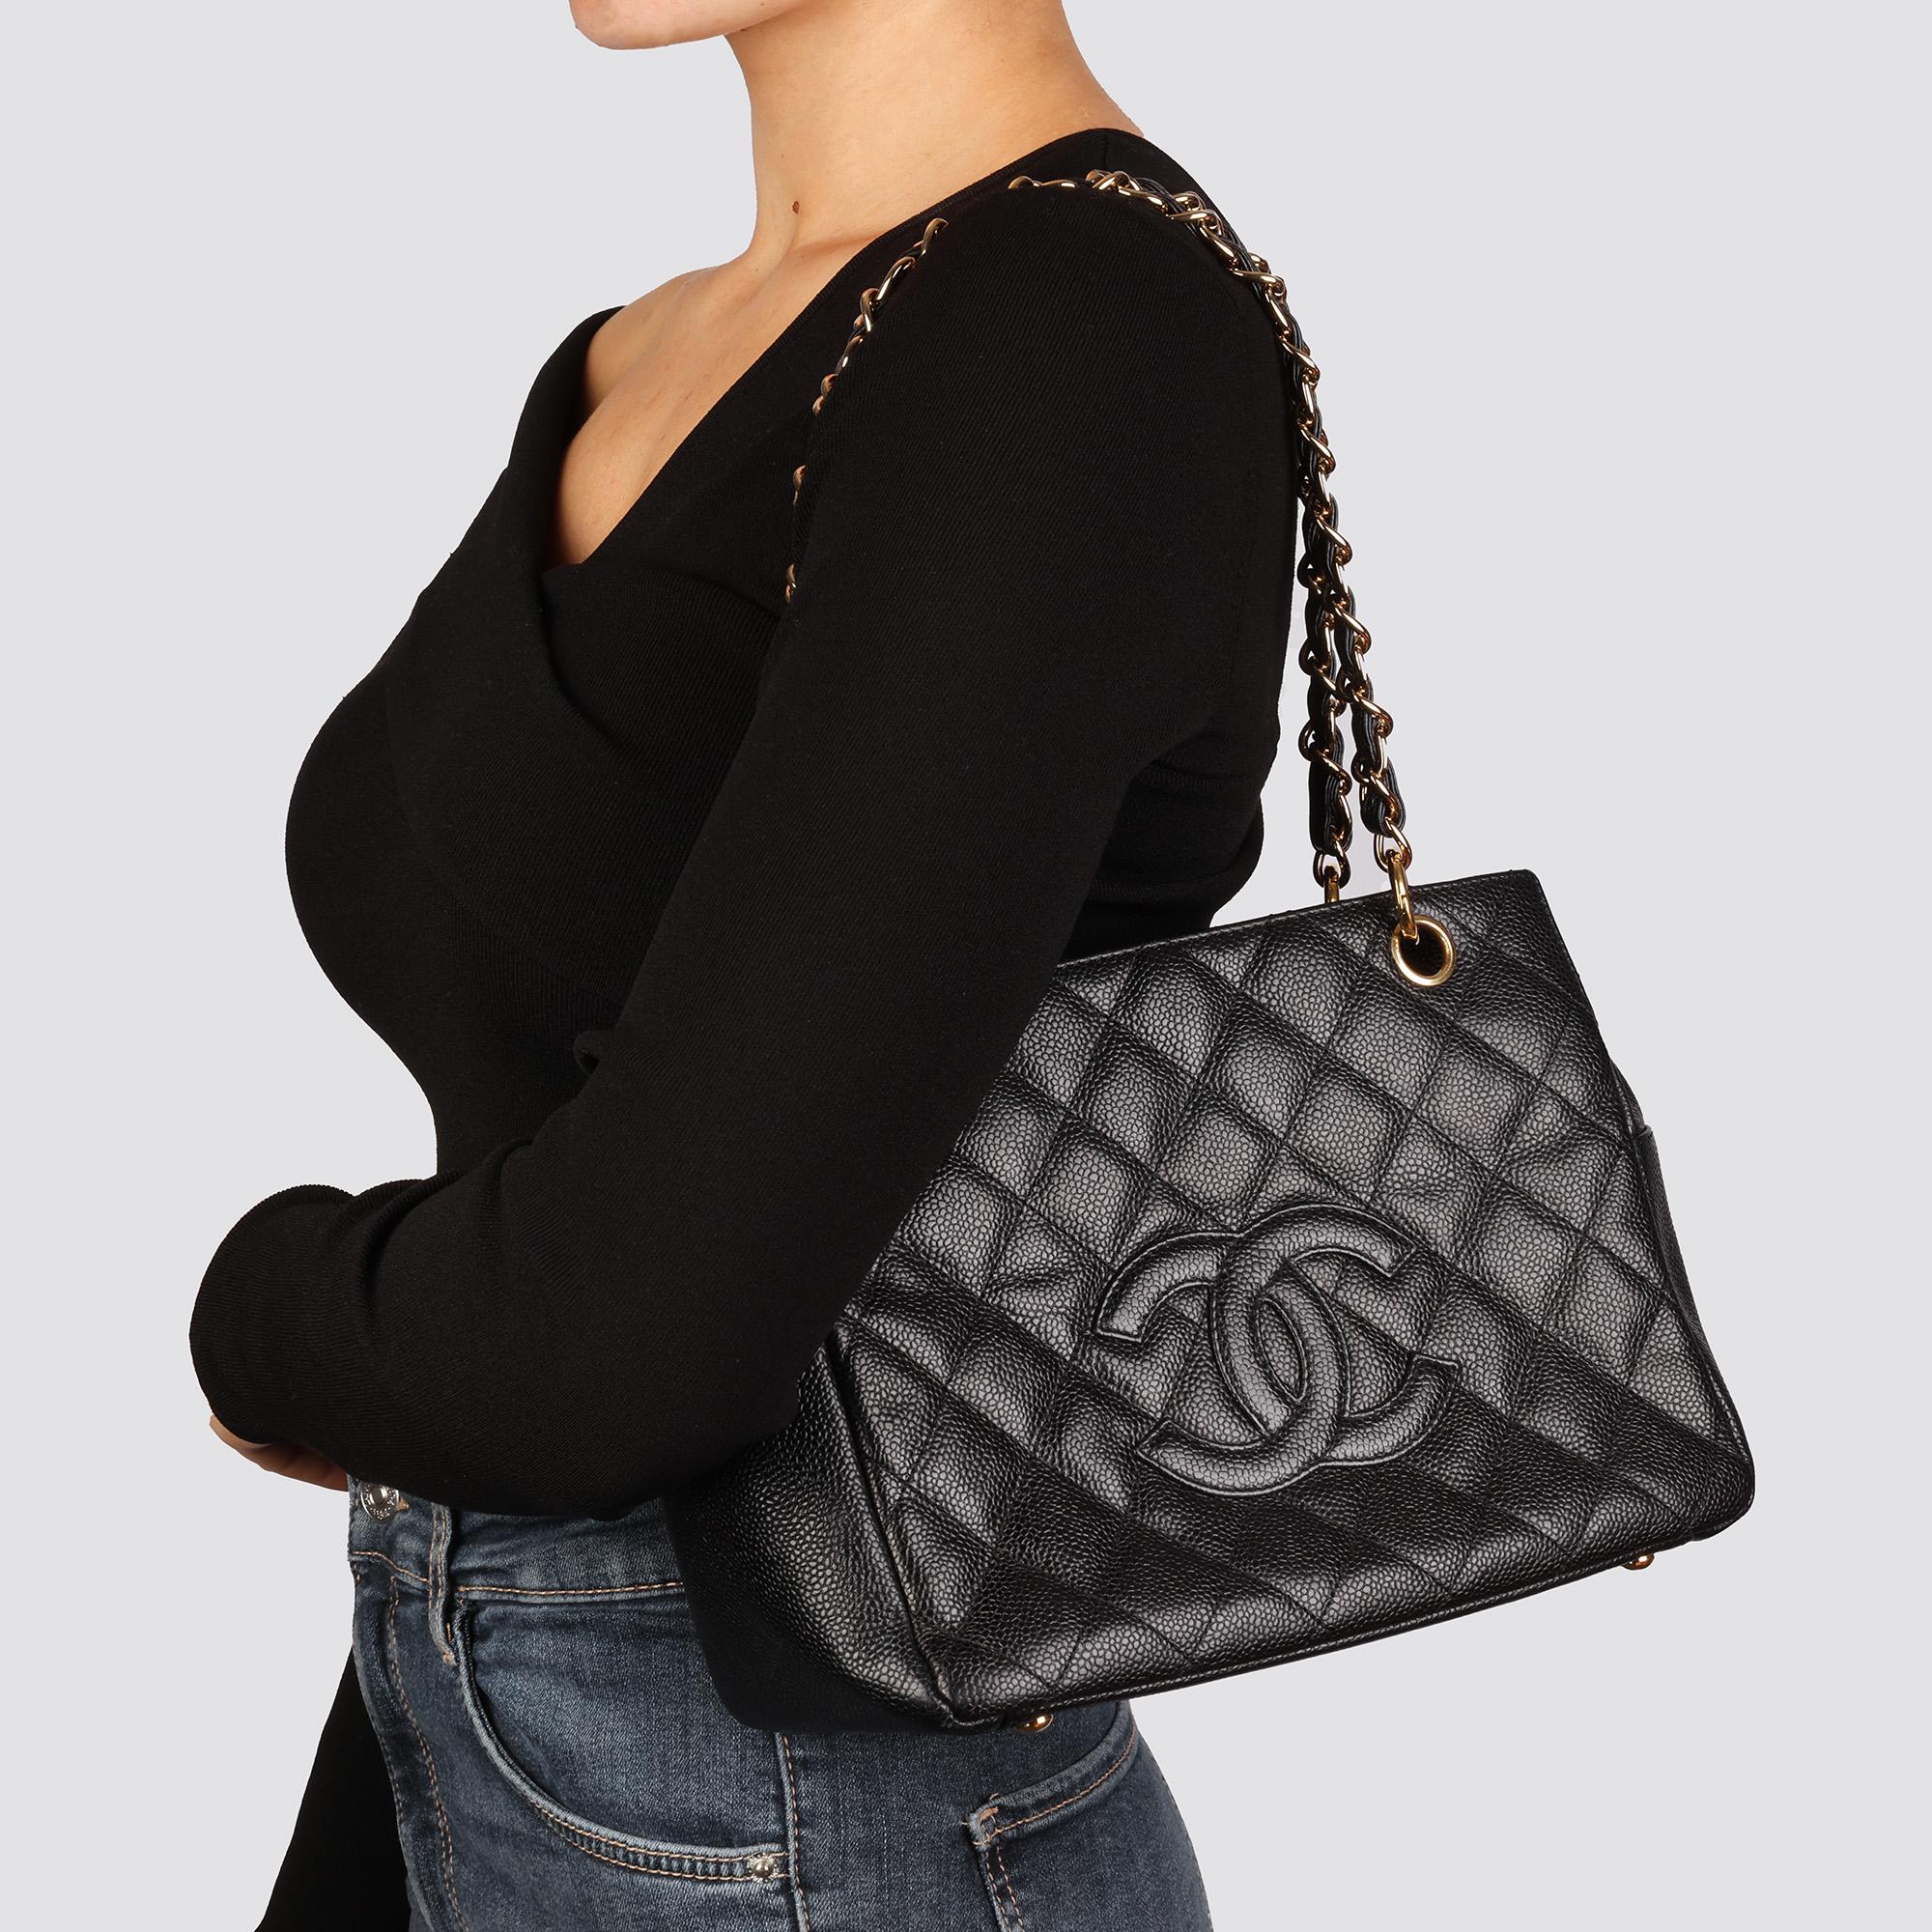 Chanel BLACK QUILTED CAVIAR LEATHER PETITE TIMELESS TOTE PTT 5